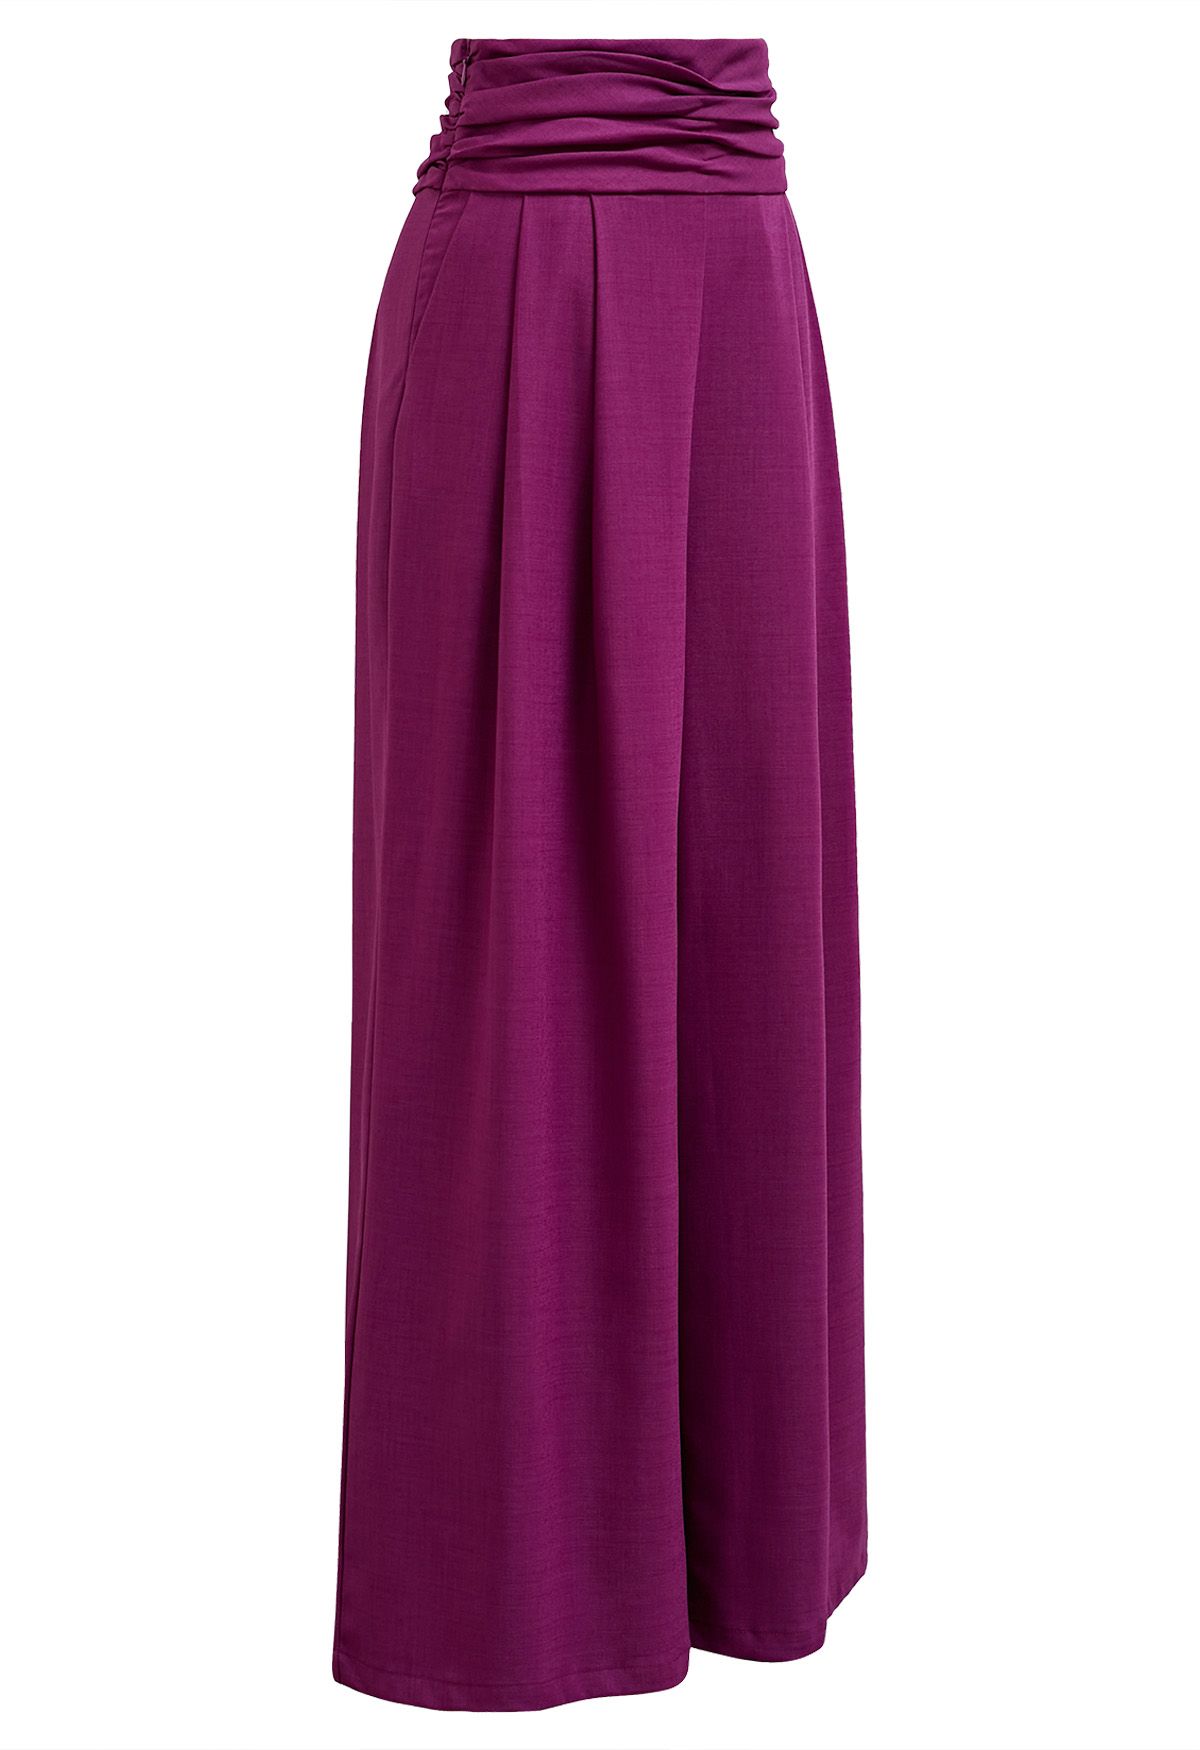 Bowknot High Waist Wide-Leg Pants in Magenta - Retro, Indie and